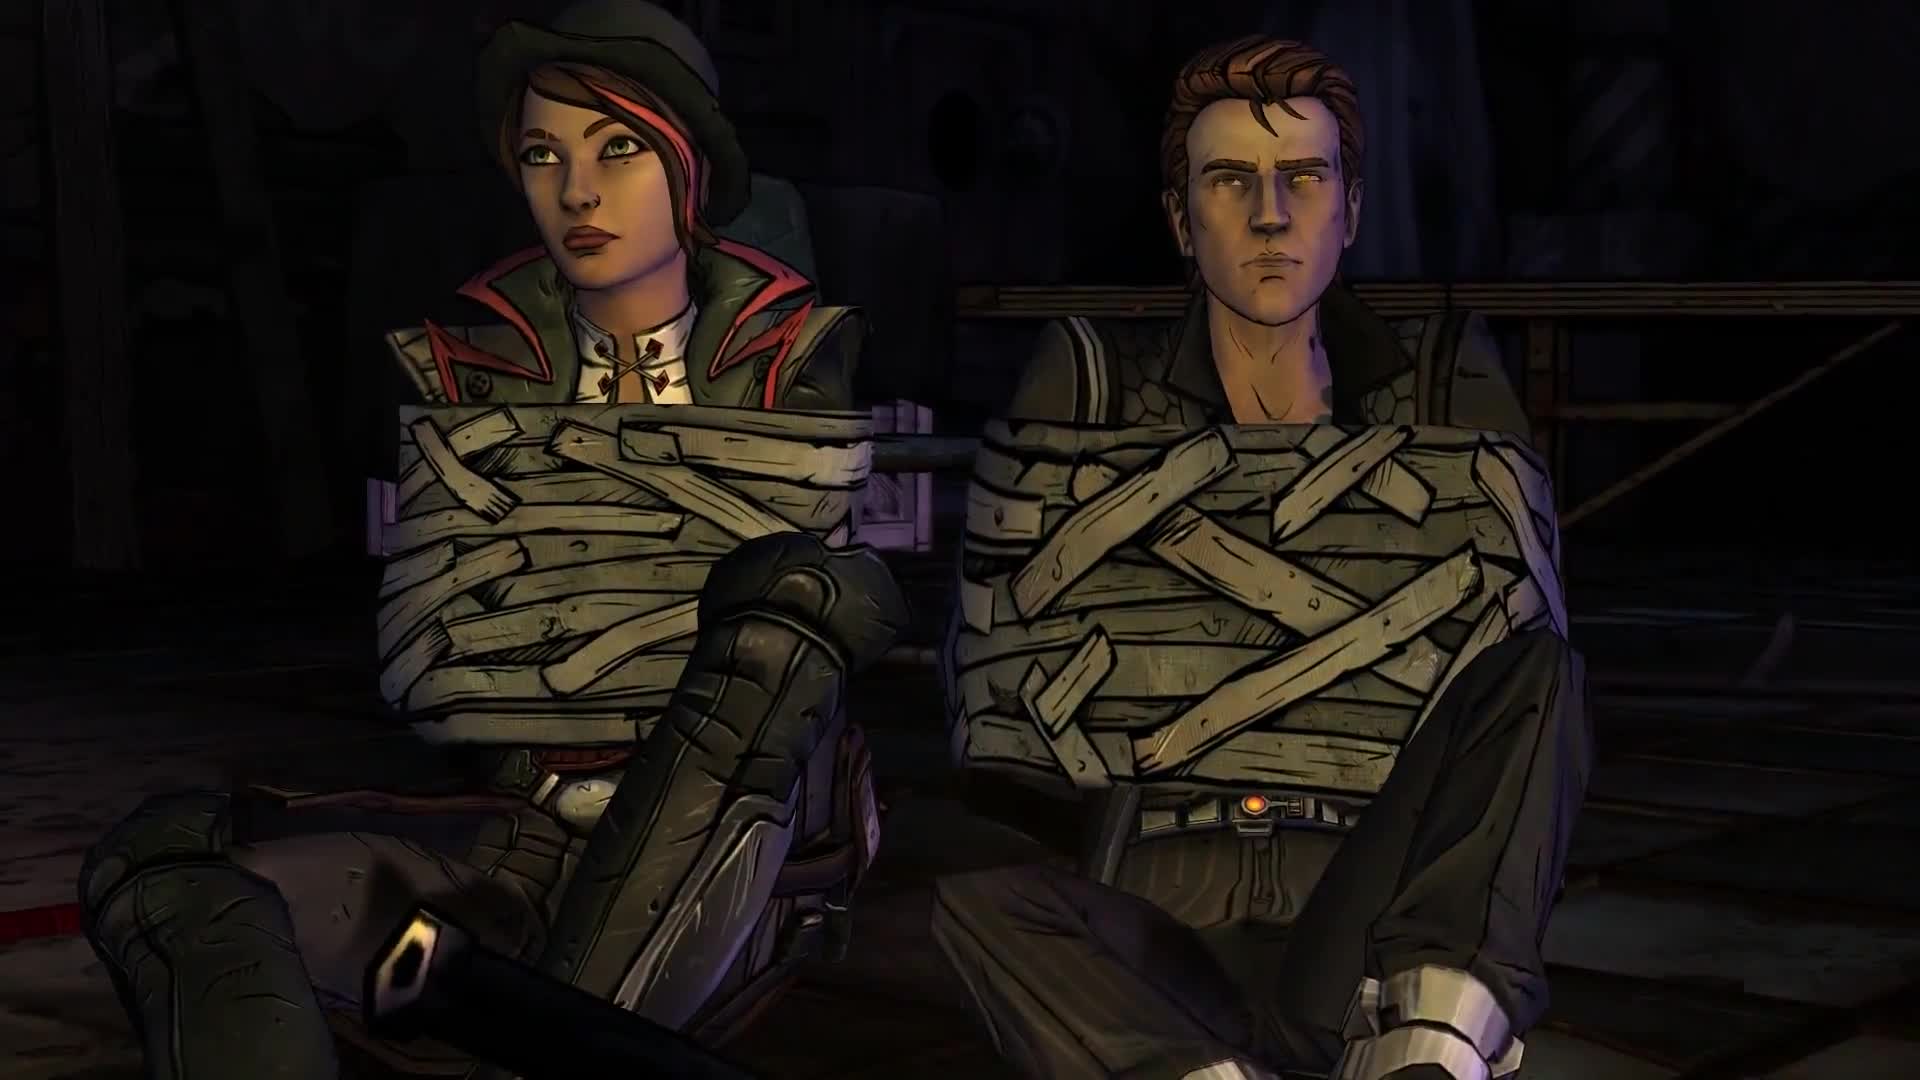 Tales from the Borderlands - Final Episode Trailer